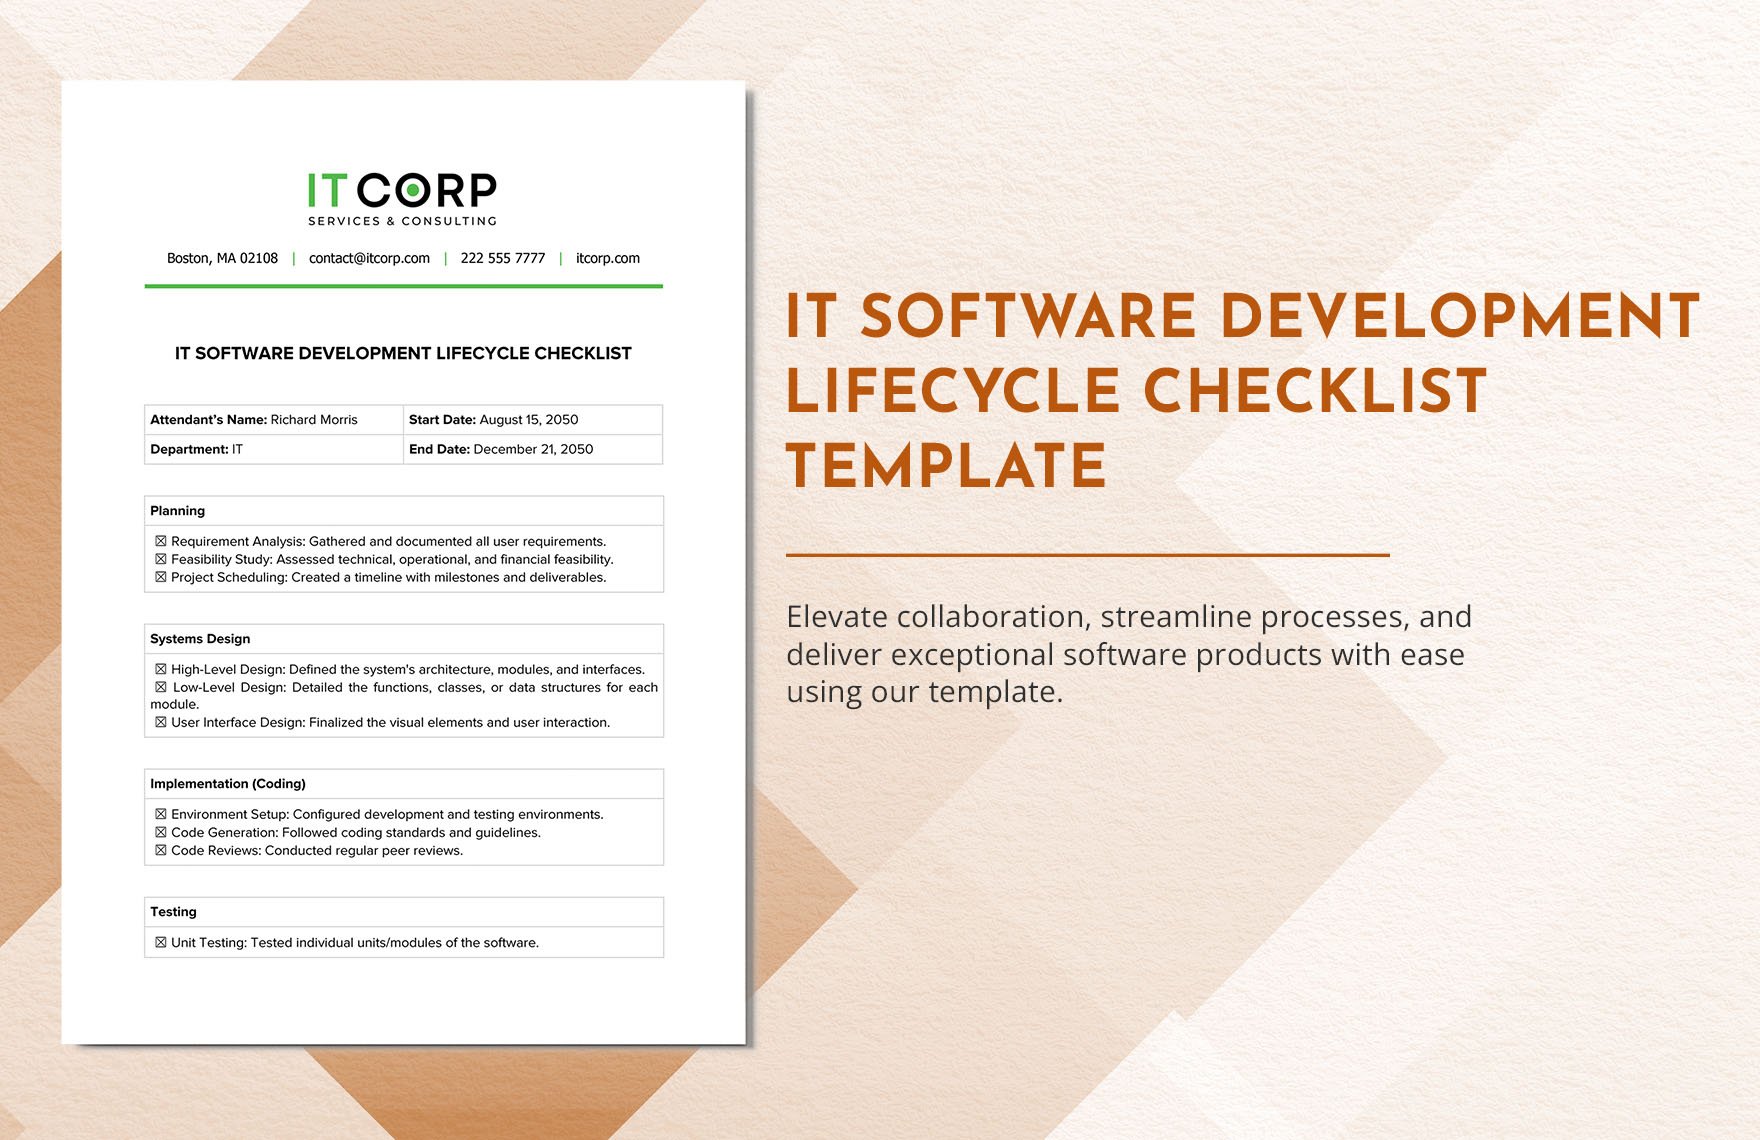 IT Software Development Lifecycle Checklist Template in Word, Google Docs, PDF